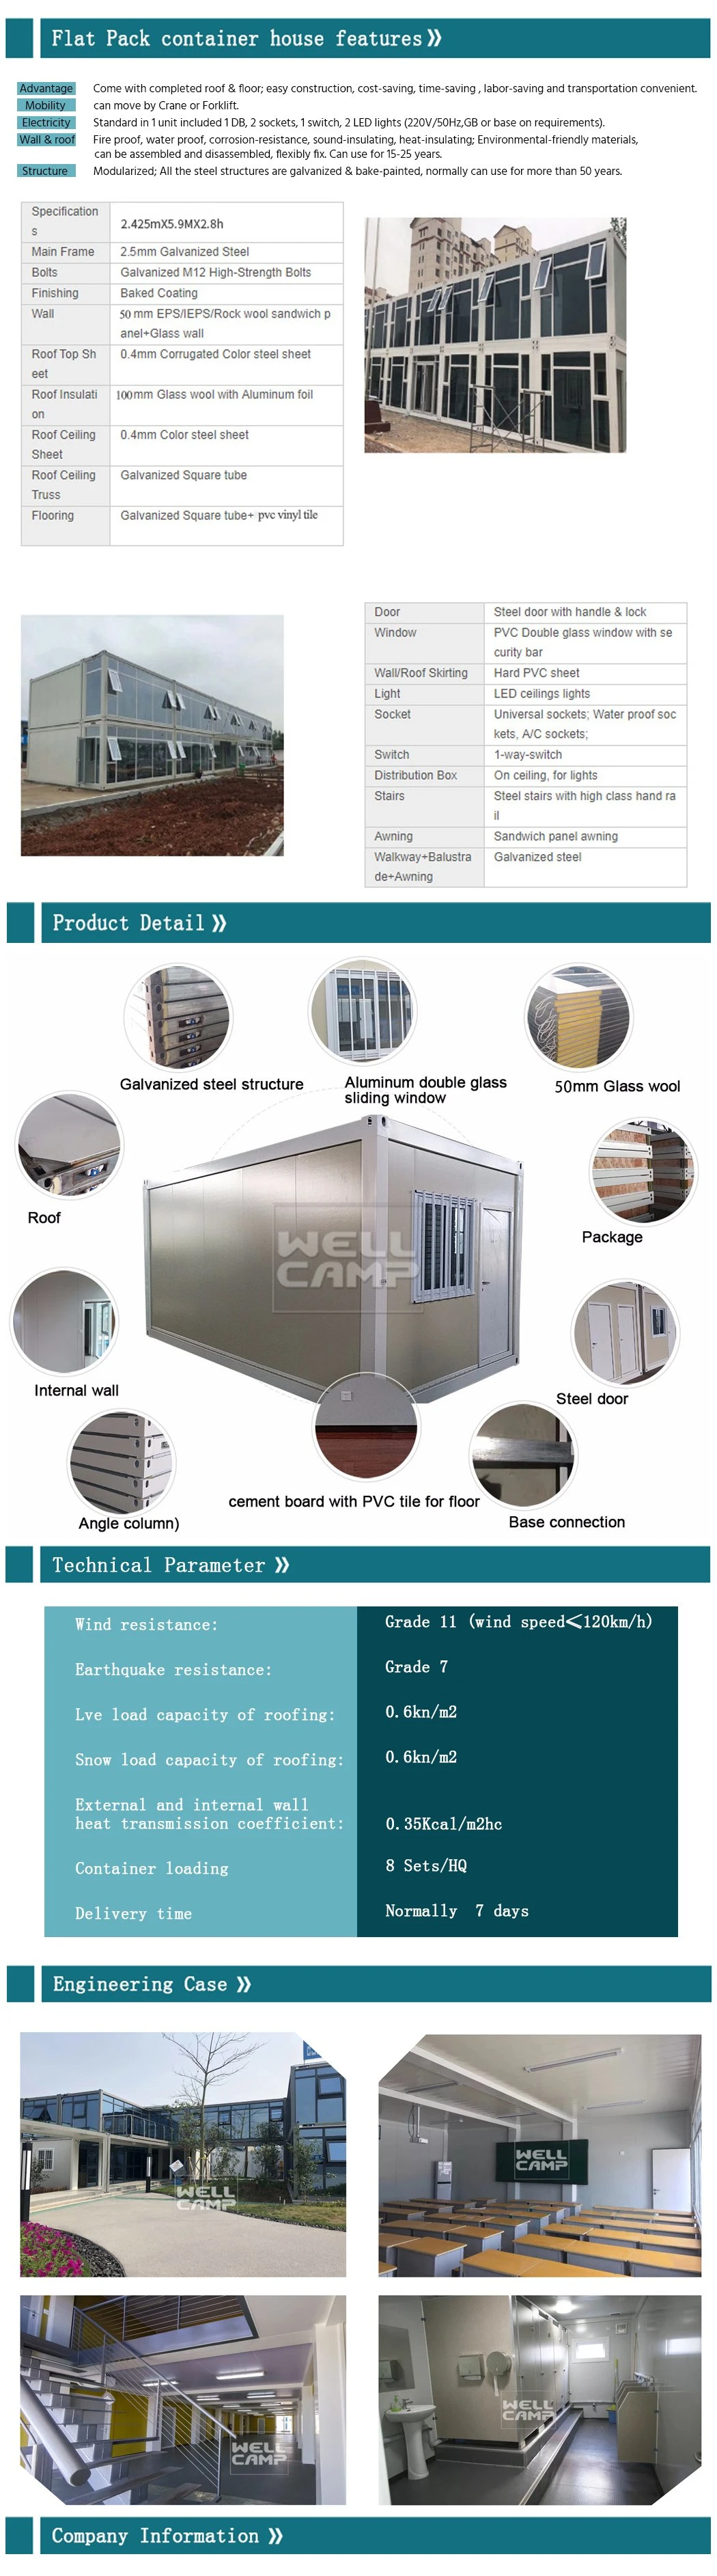 New Design Modern Container Hotel Apartment Flat Pack Containe Hotel Room Shipping Containe House Hotel Apartment